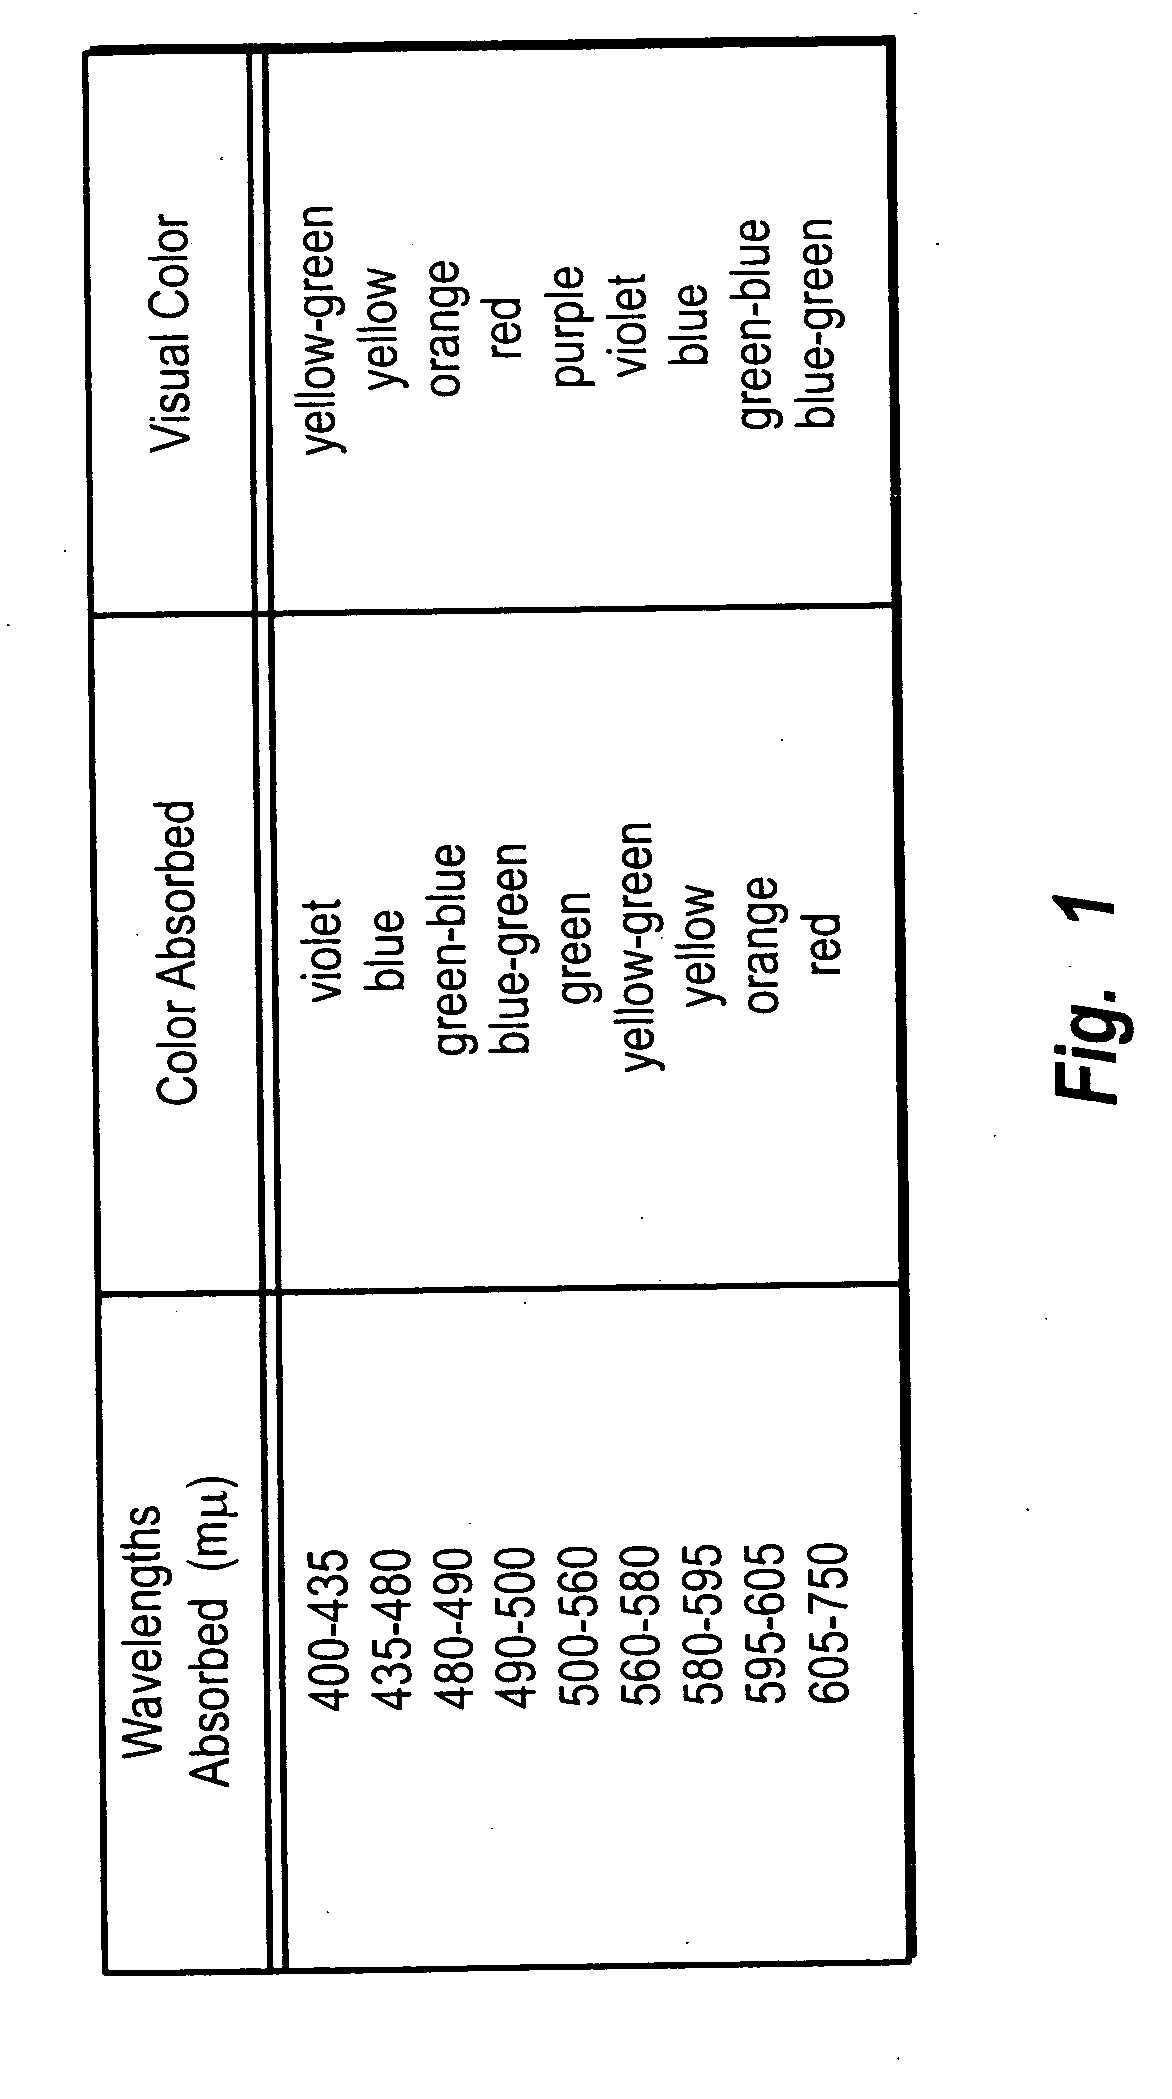 Tooth whitening compositions and methods for using the same